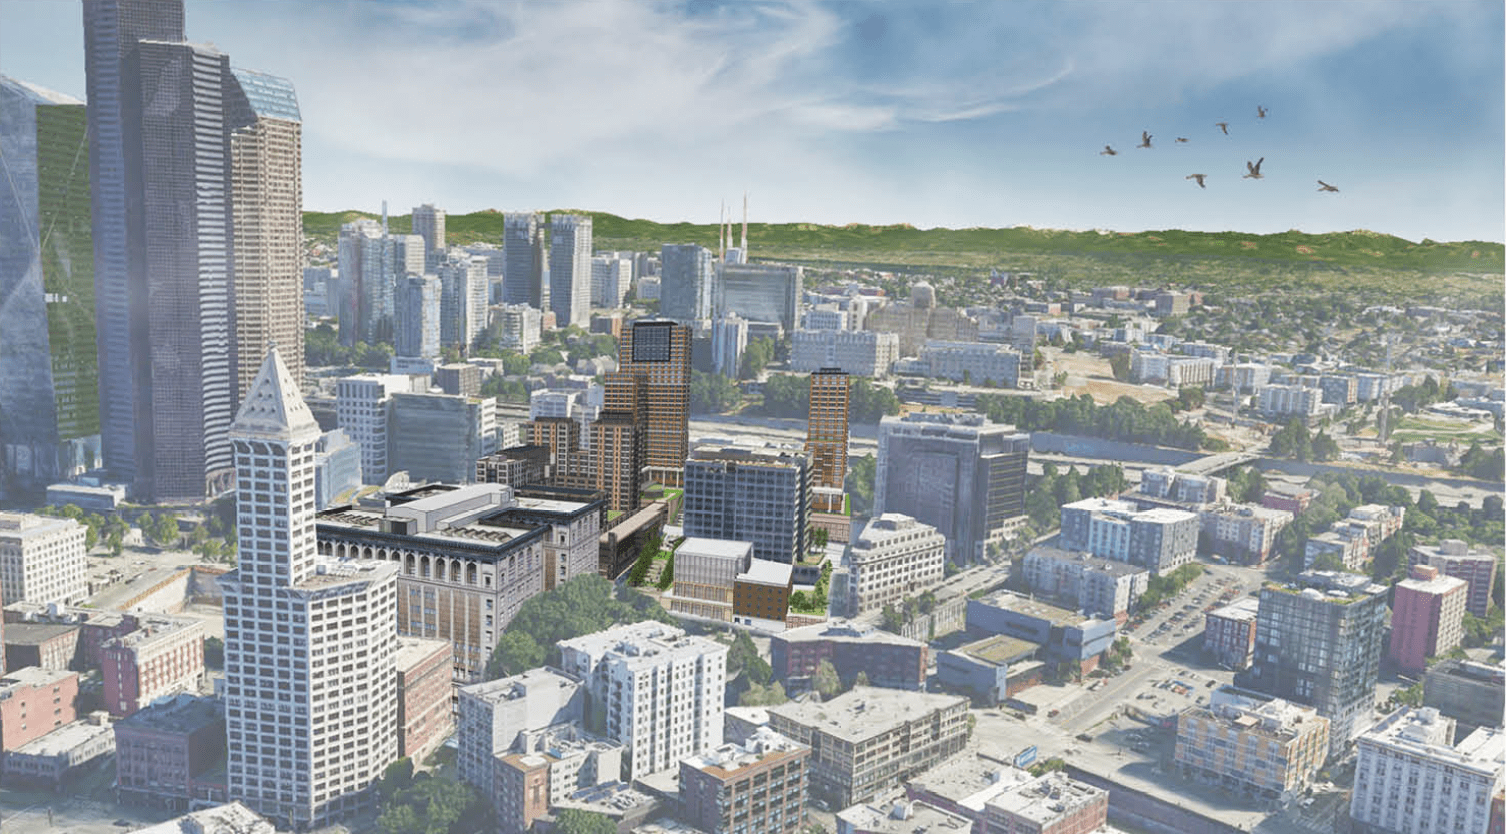 The Cascades rendering